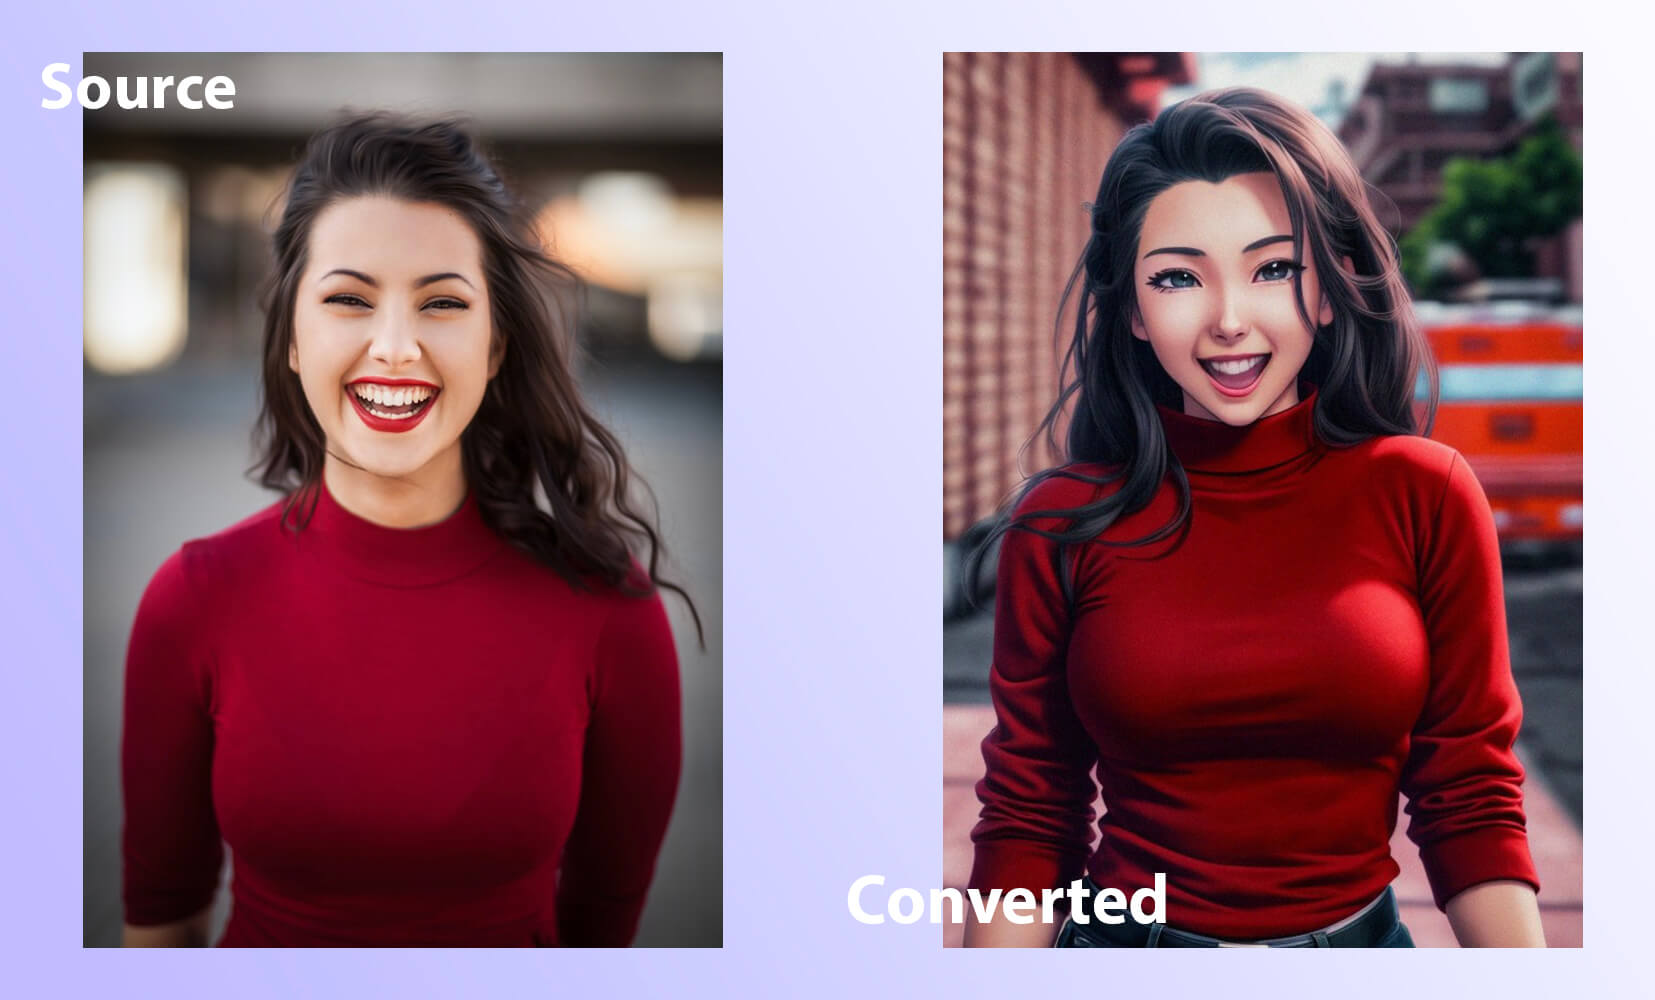 Style Conversion Examples